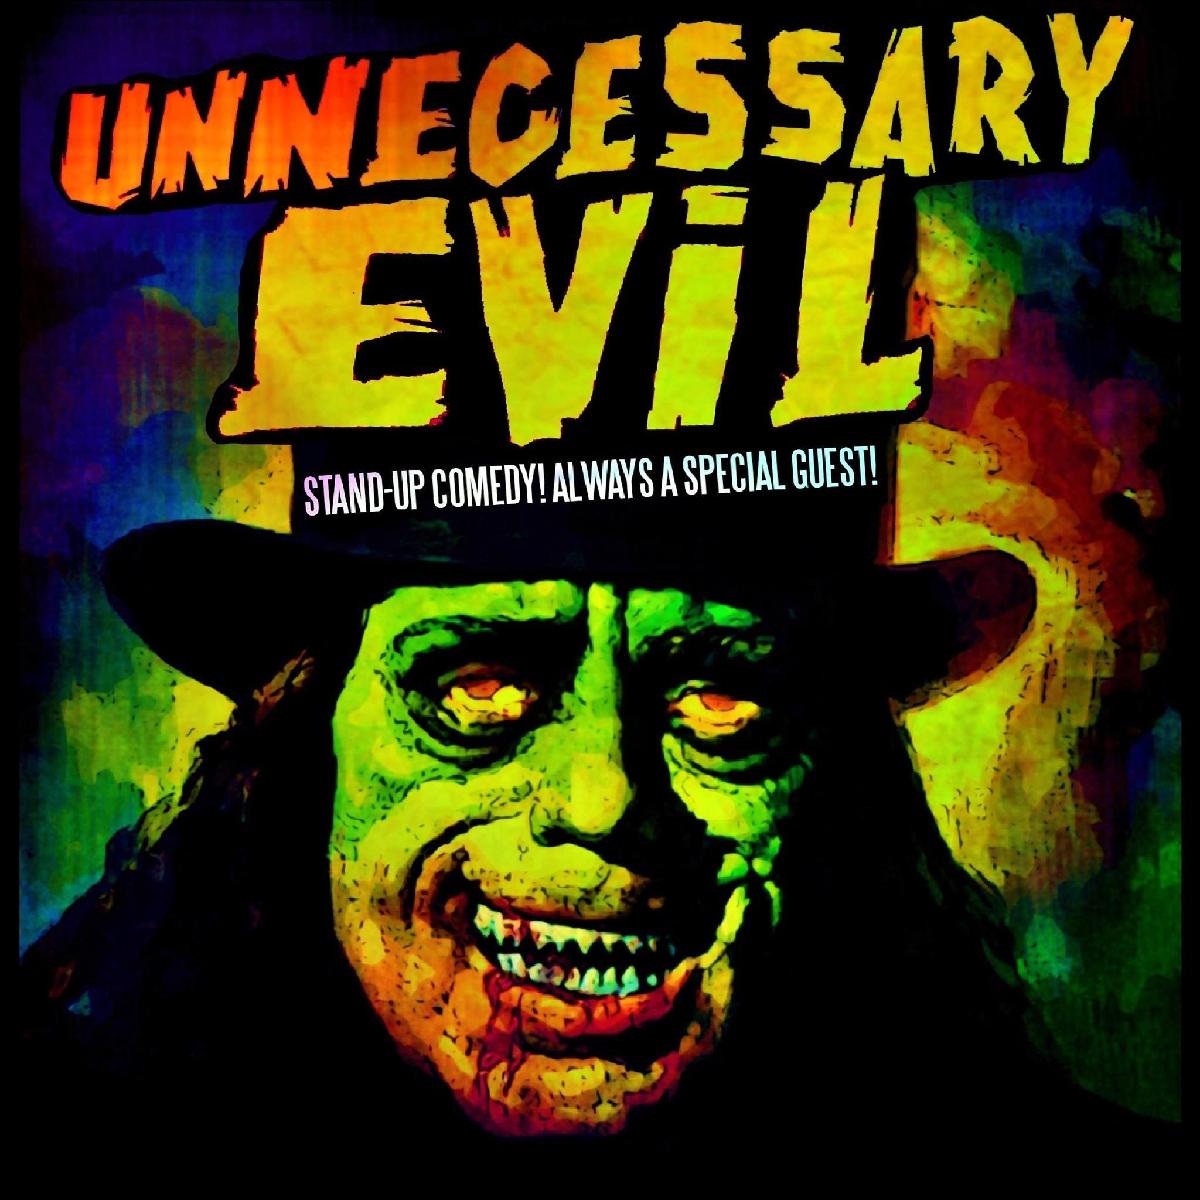 Unnecessary Evil: Stand-up Comedy